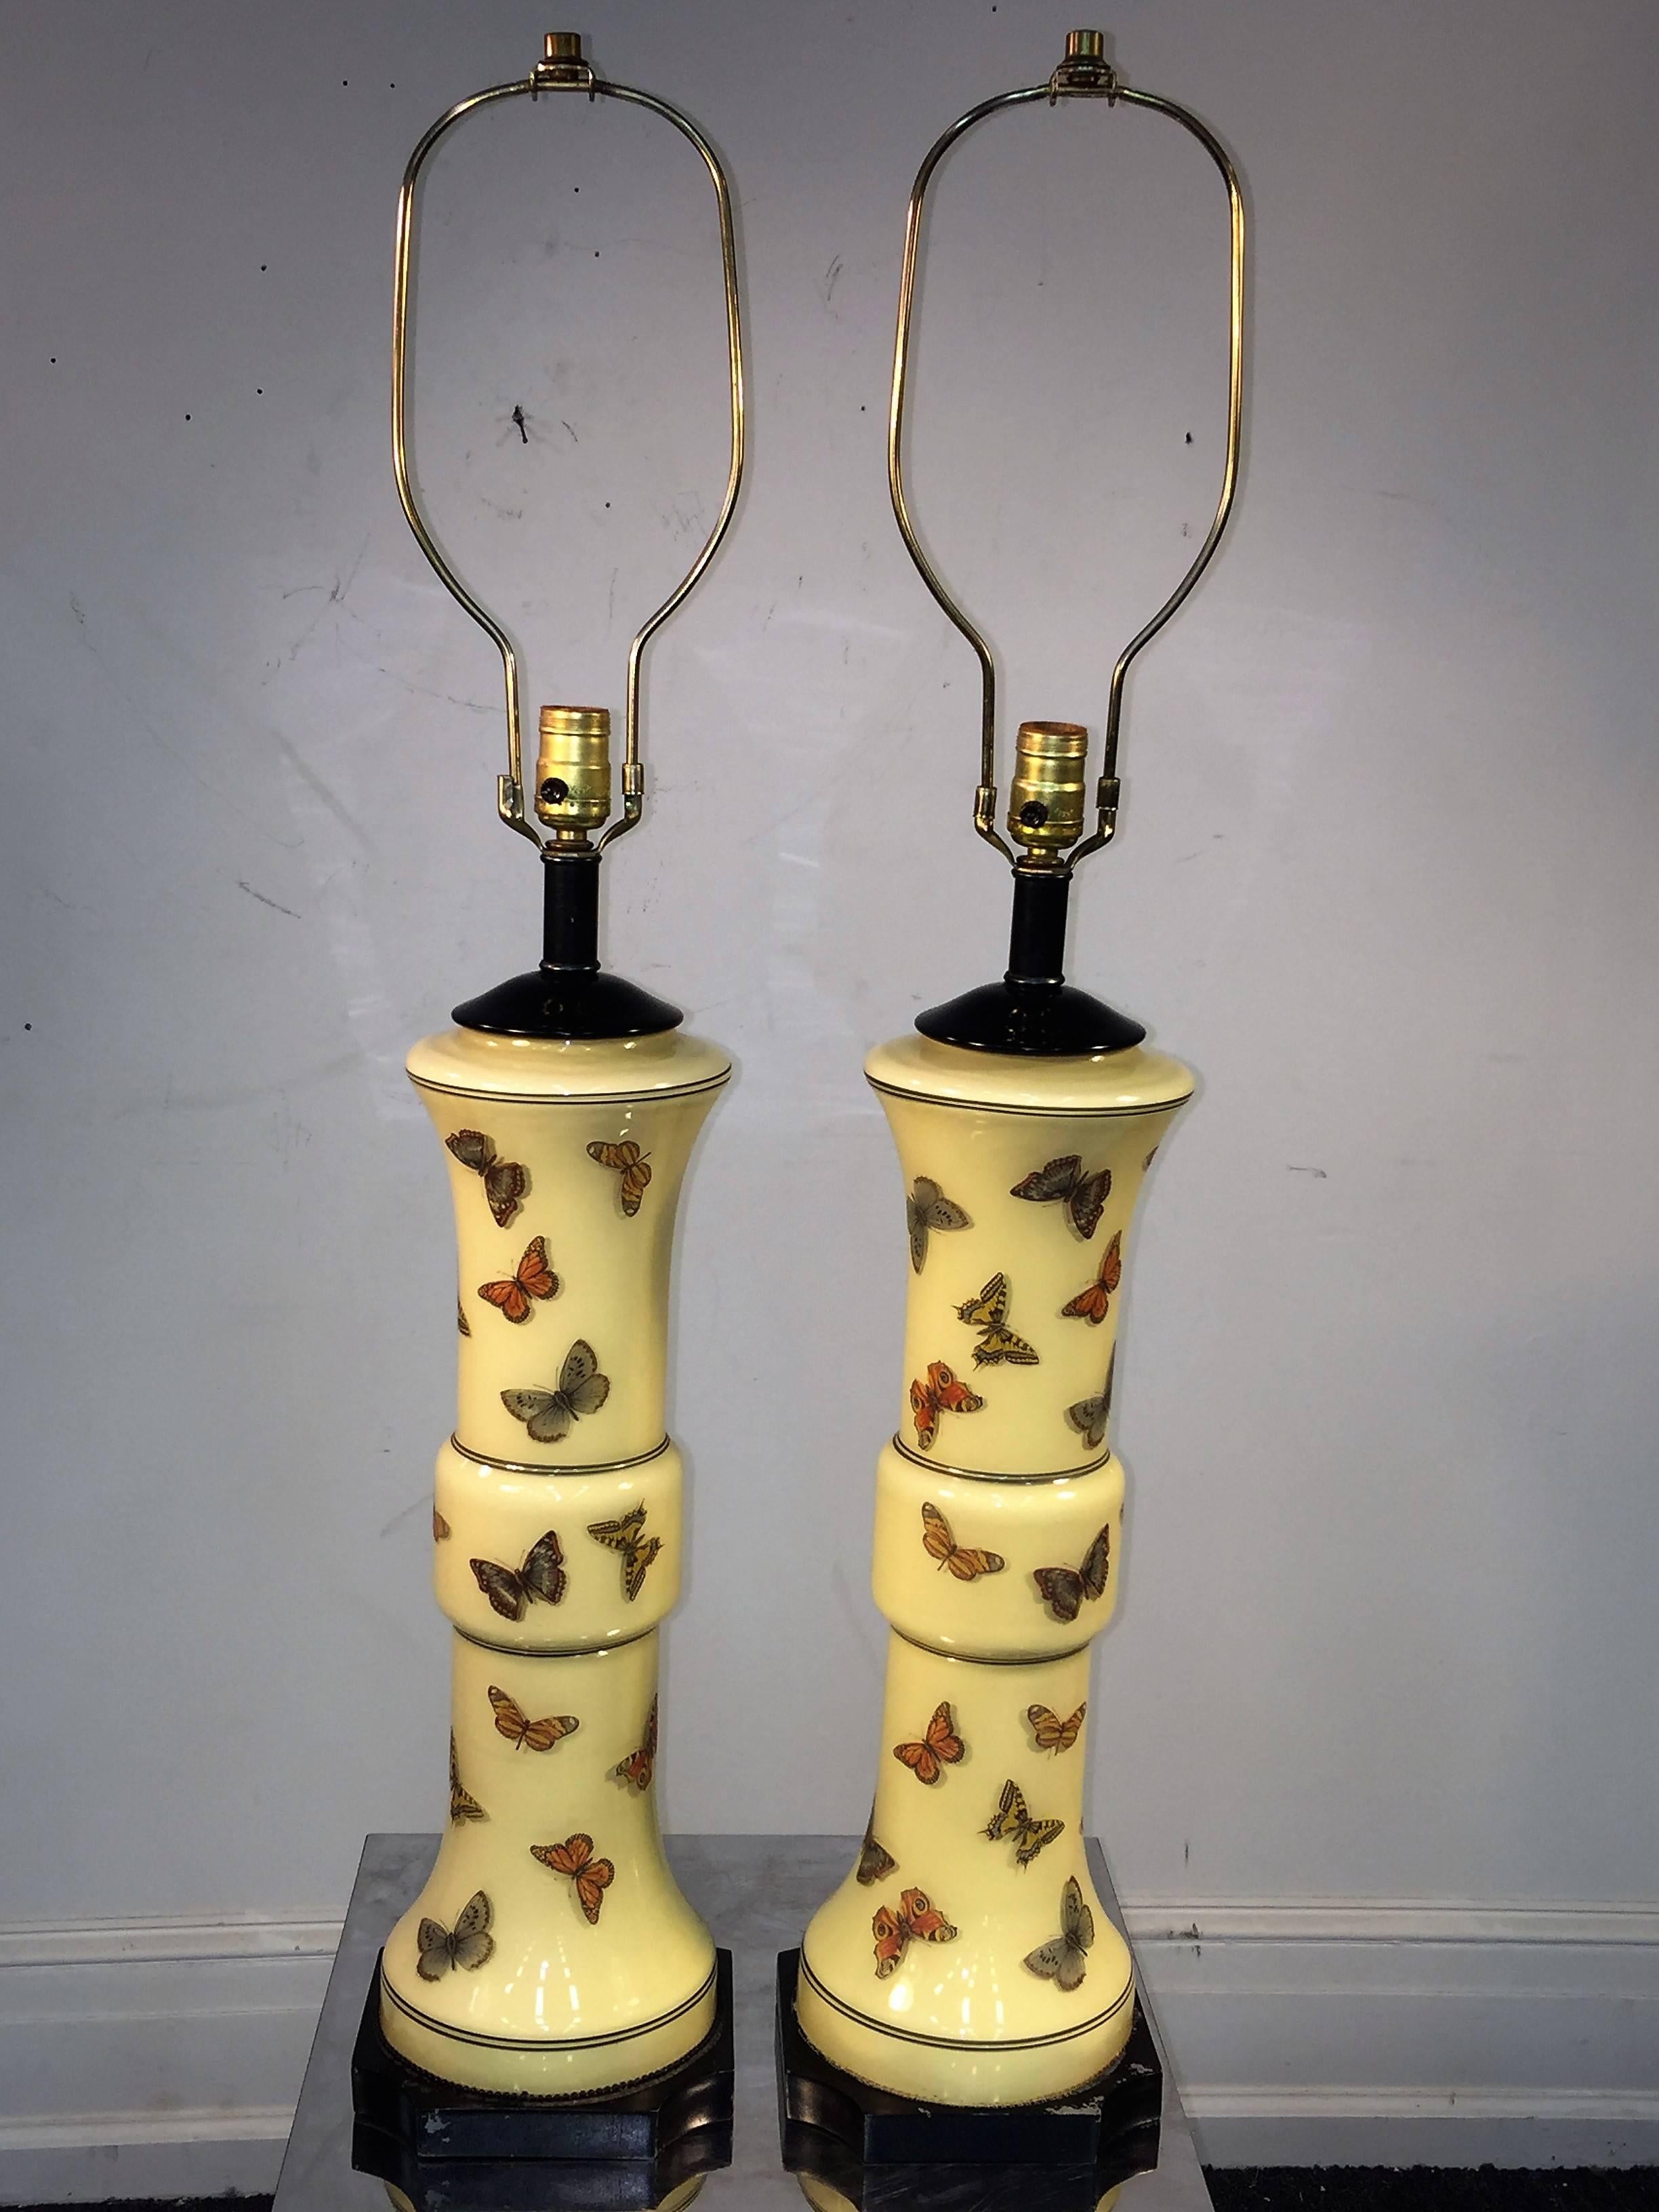 Marvelous Pair of Fornasetti Style Enameled Glass Butterfly Lamps For Sale 4